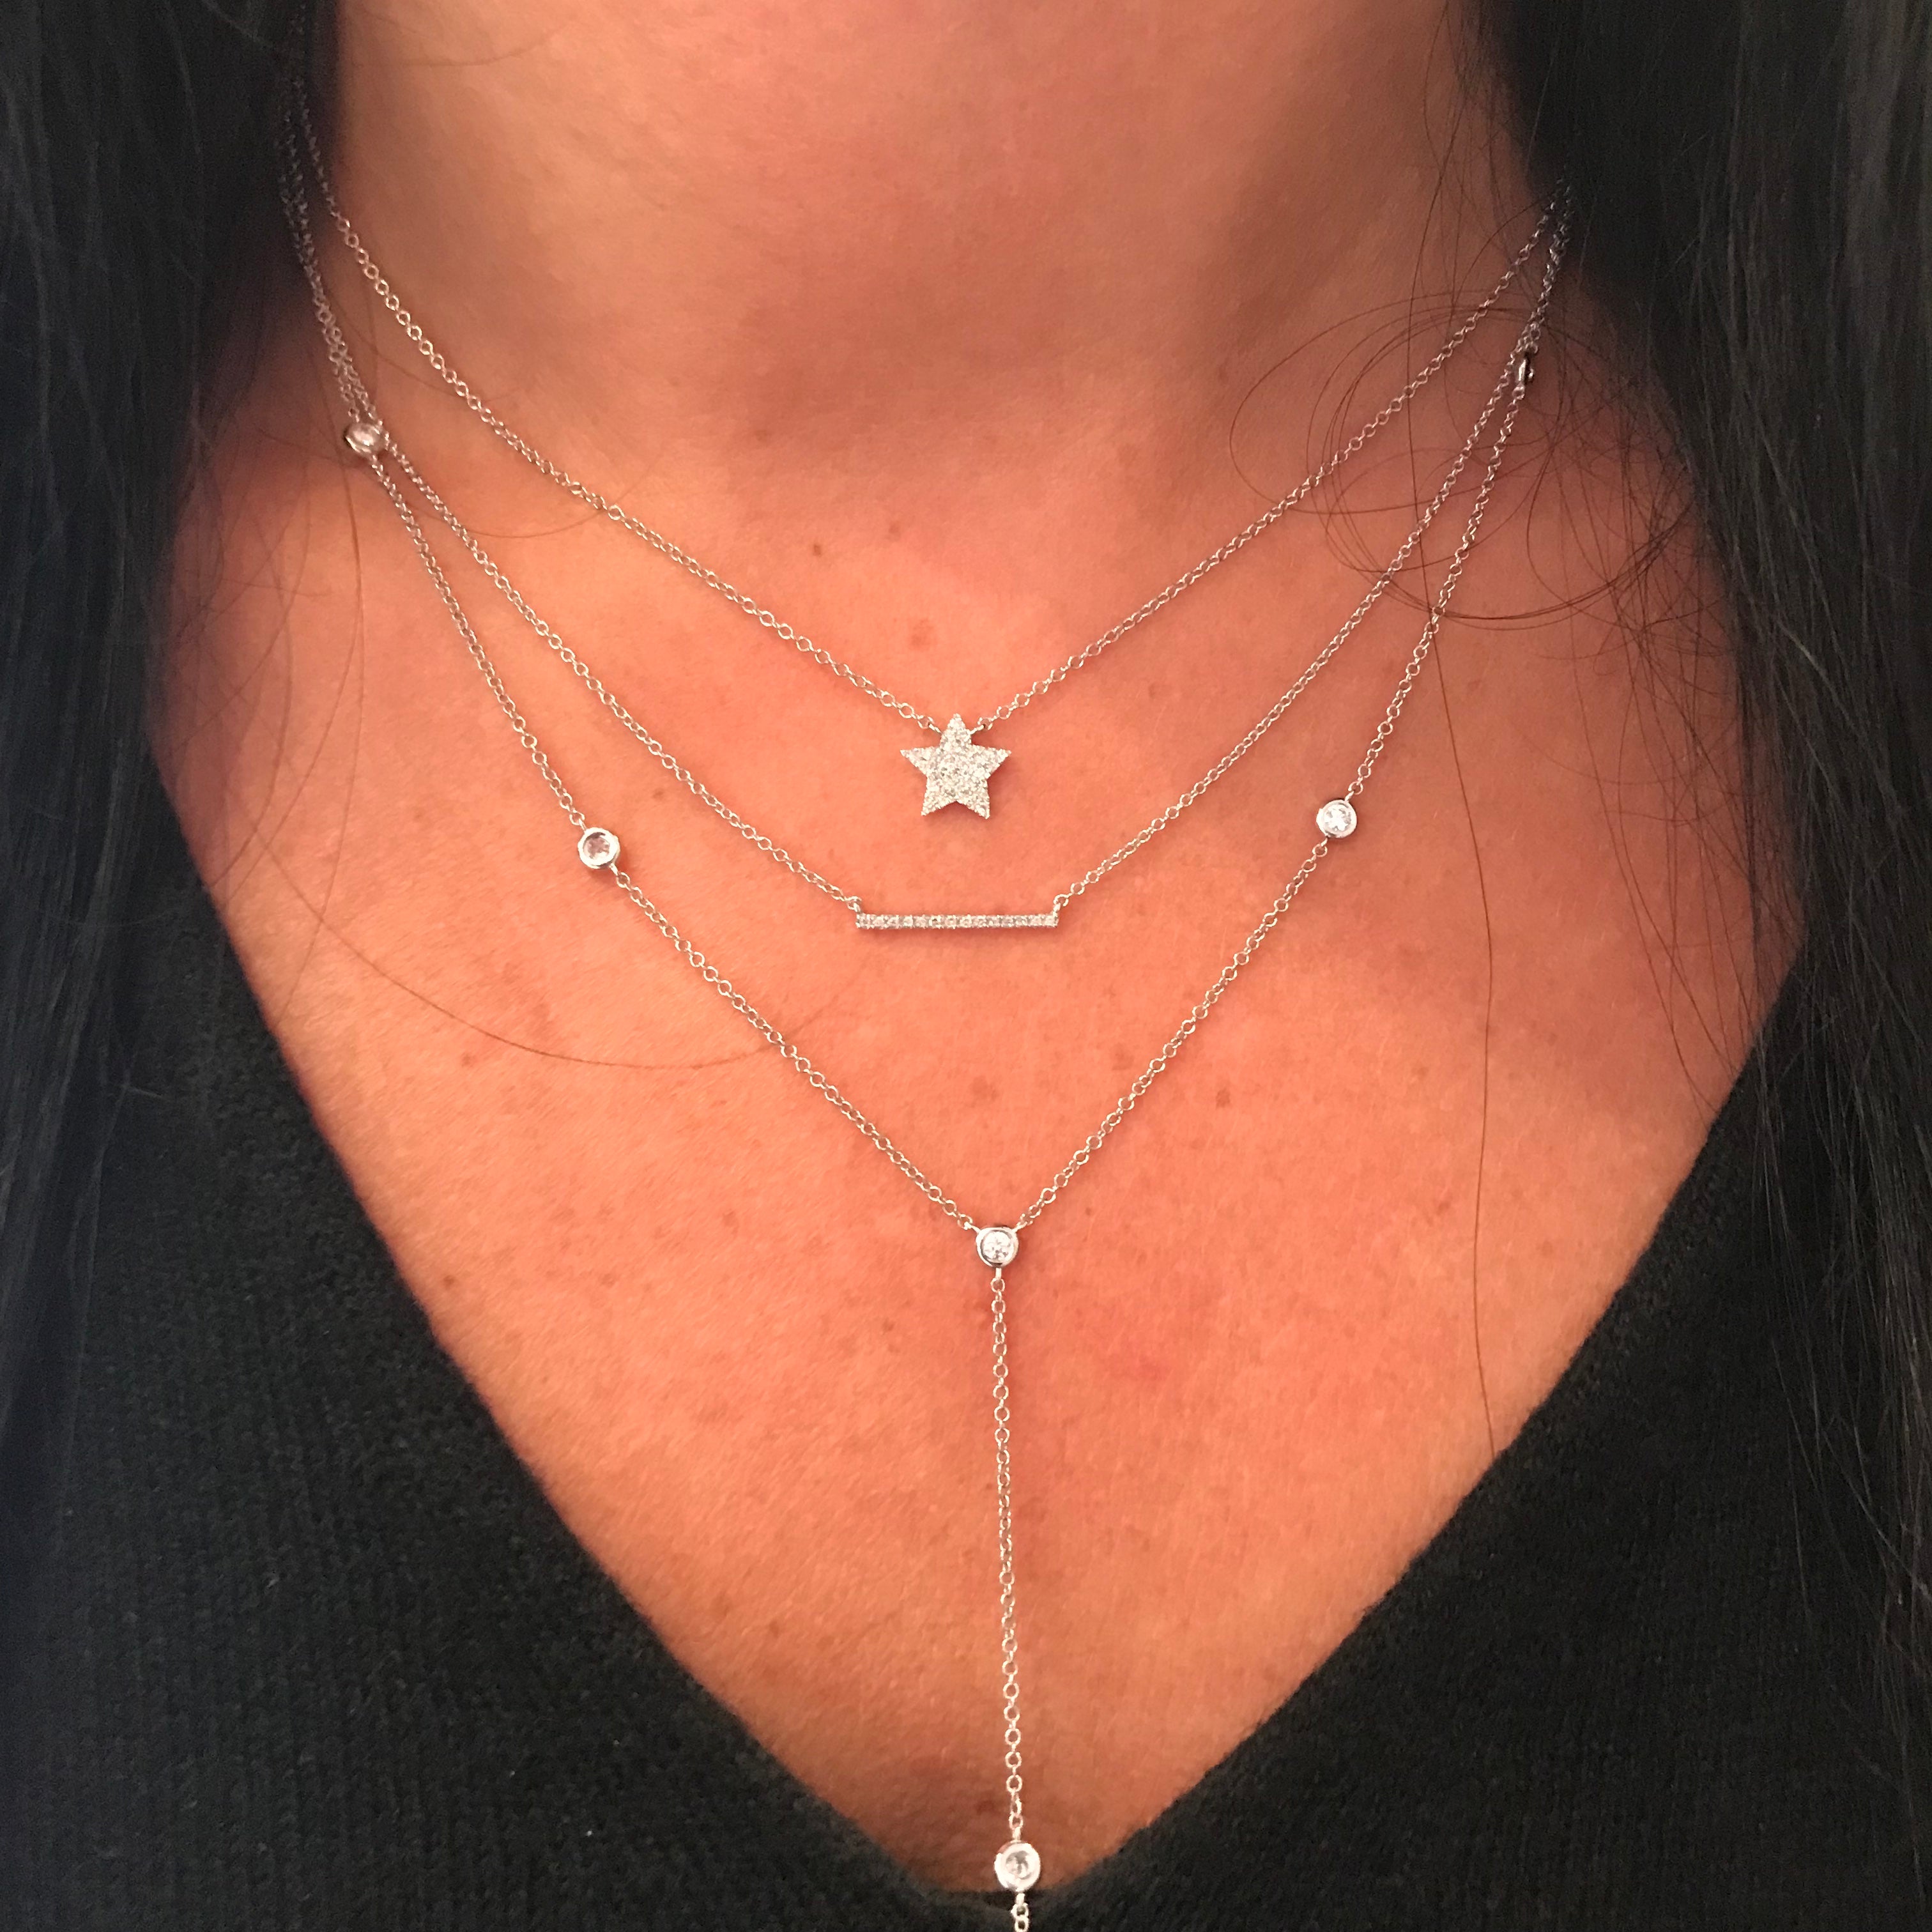 thin necklace with small diamond